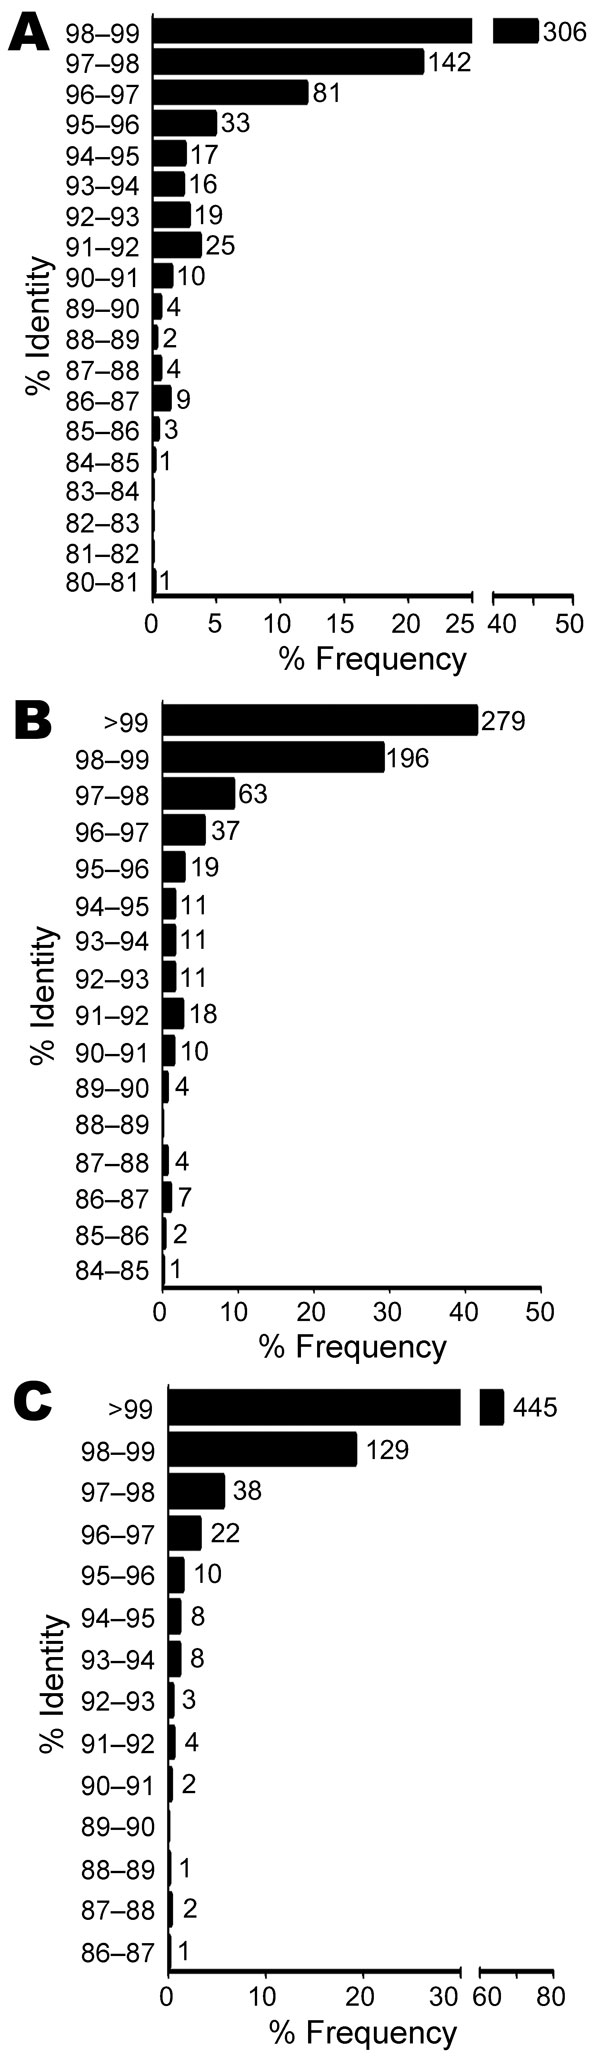 Identities of 673 unidentified bacterial isolates to best match in BLASTn (23) database with species-level (A) or genus-level annotation (B) and identity to best match in database, regardless of annotation status (C). The y-axis indicates relative frequency. Numbers above columns represent isolate counts.